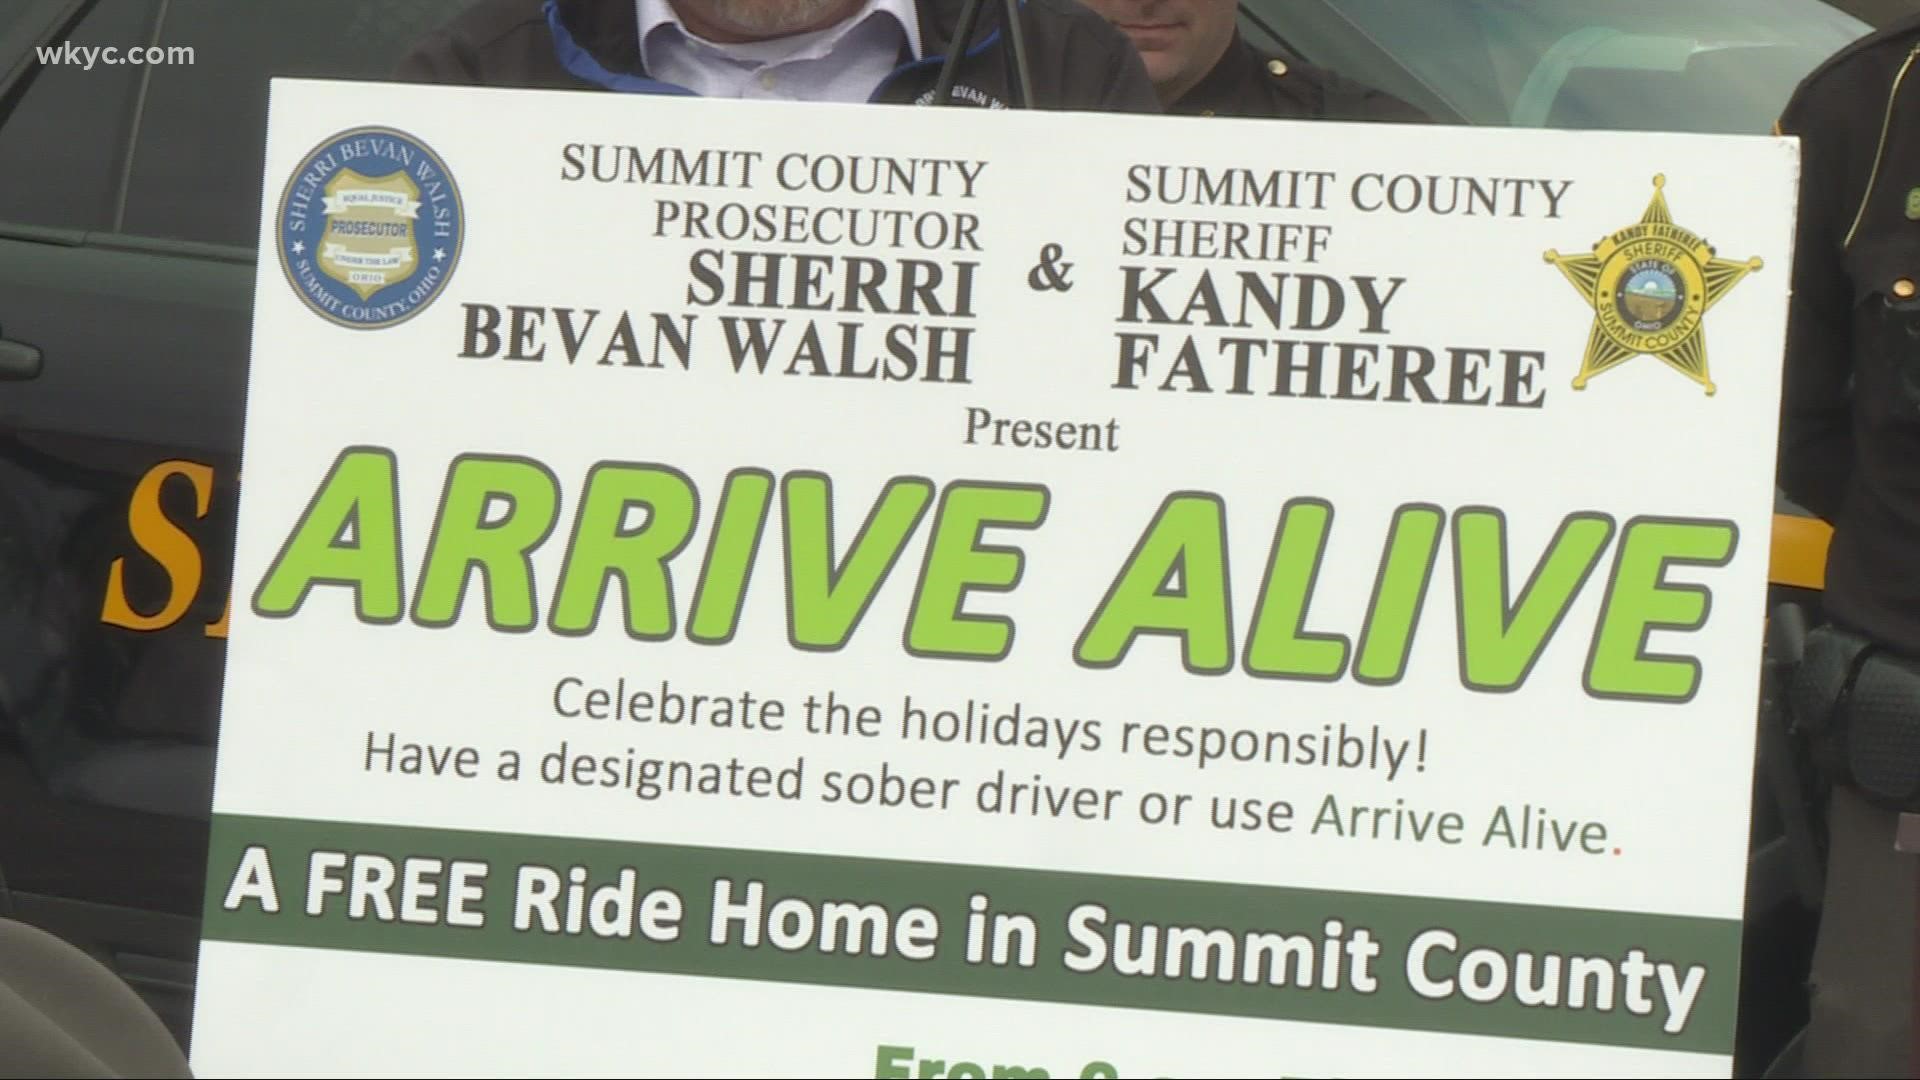 The county is encouraging people to take advantage of the program to avoid drunk driving.